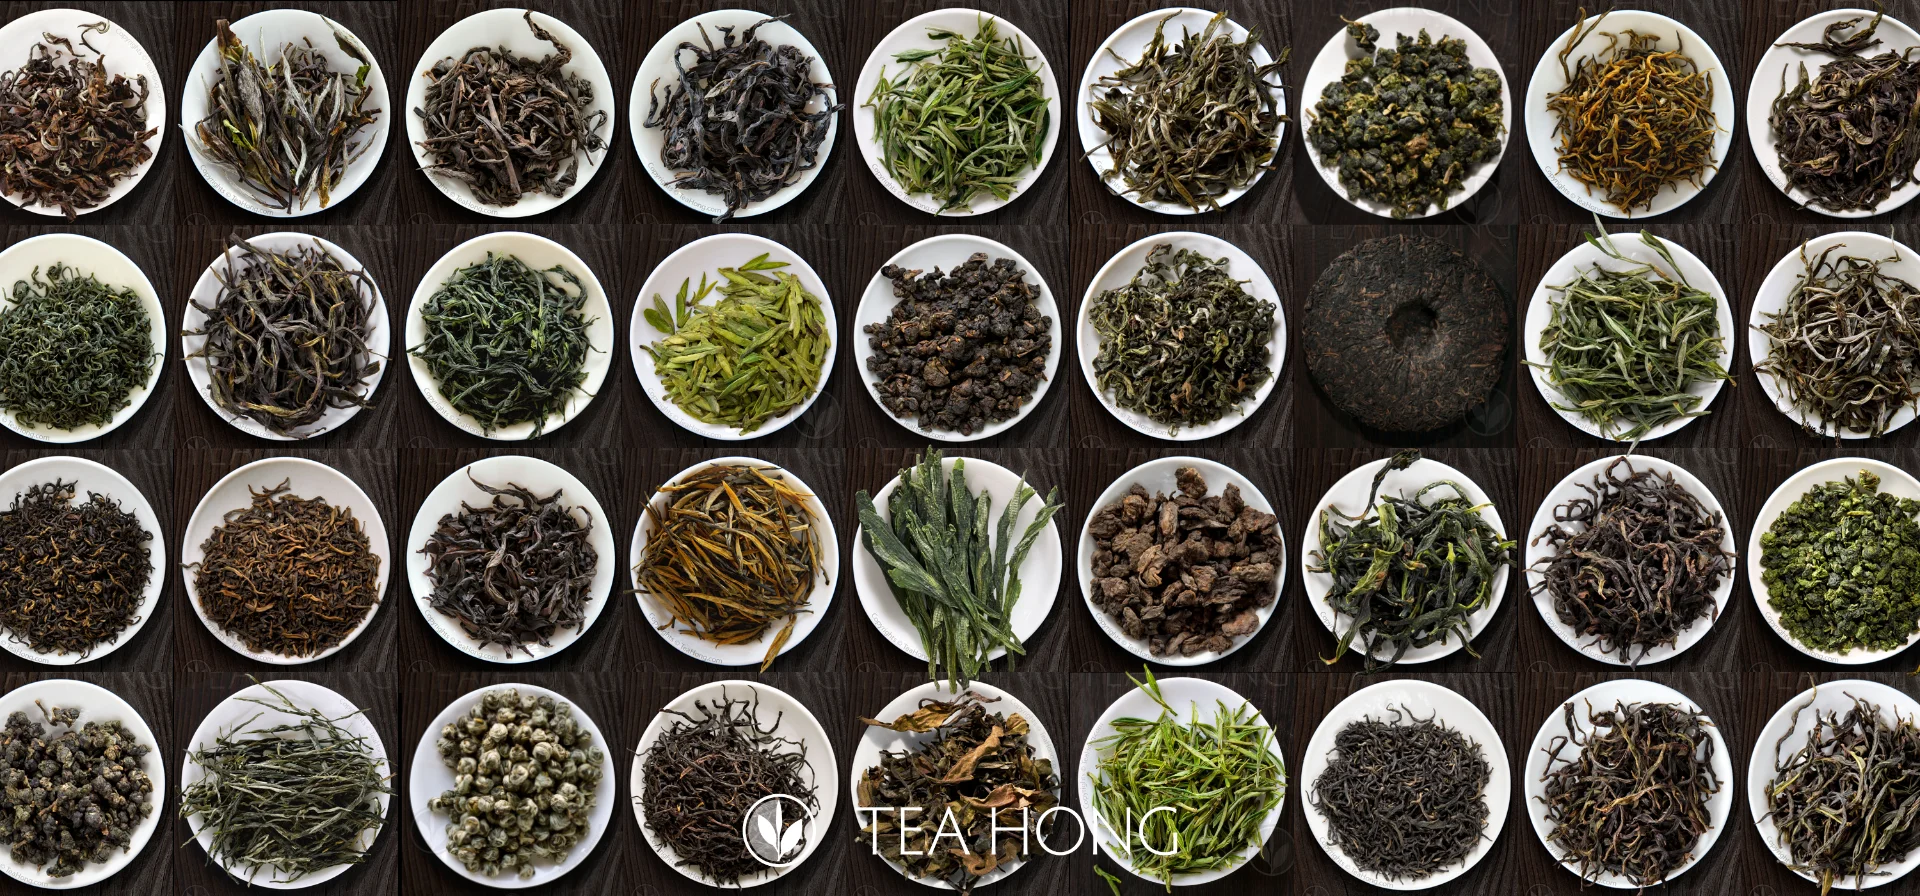 Different varieties of tealeaves each in a same size round dish arranged neatly on a grid. 36 of them in the picture.